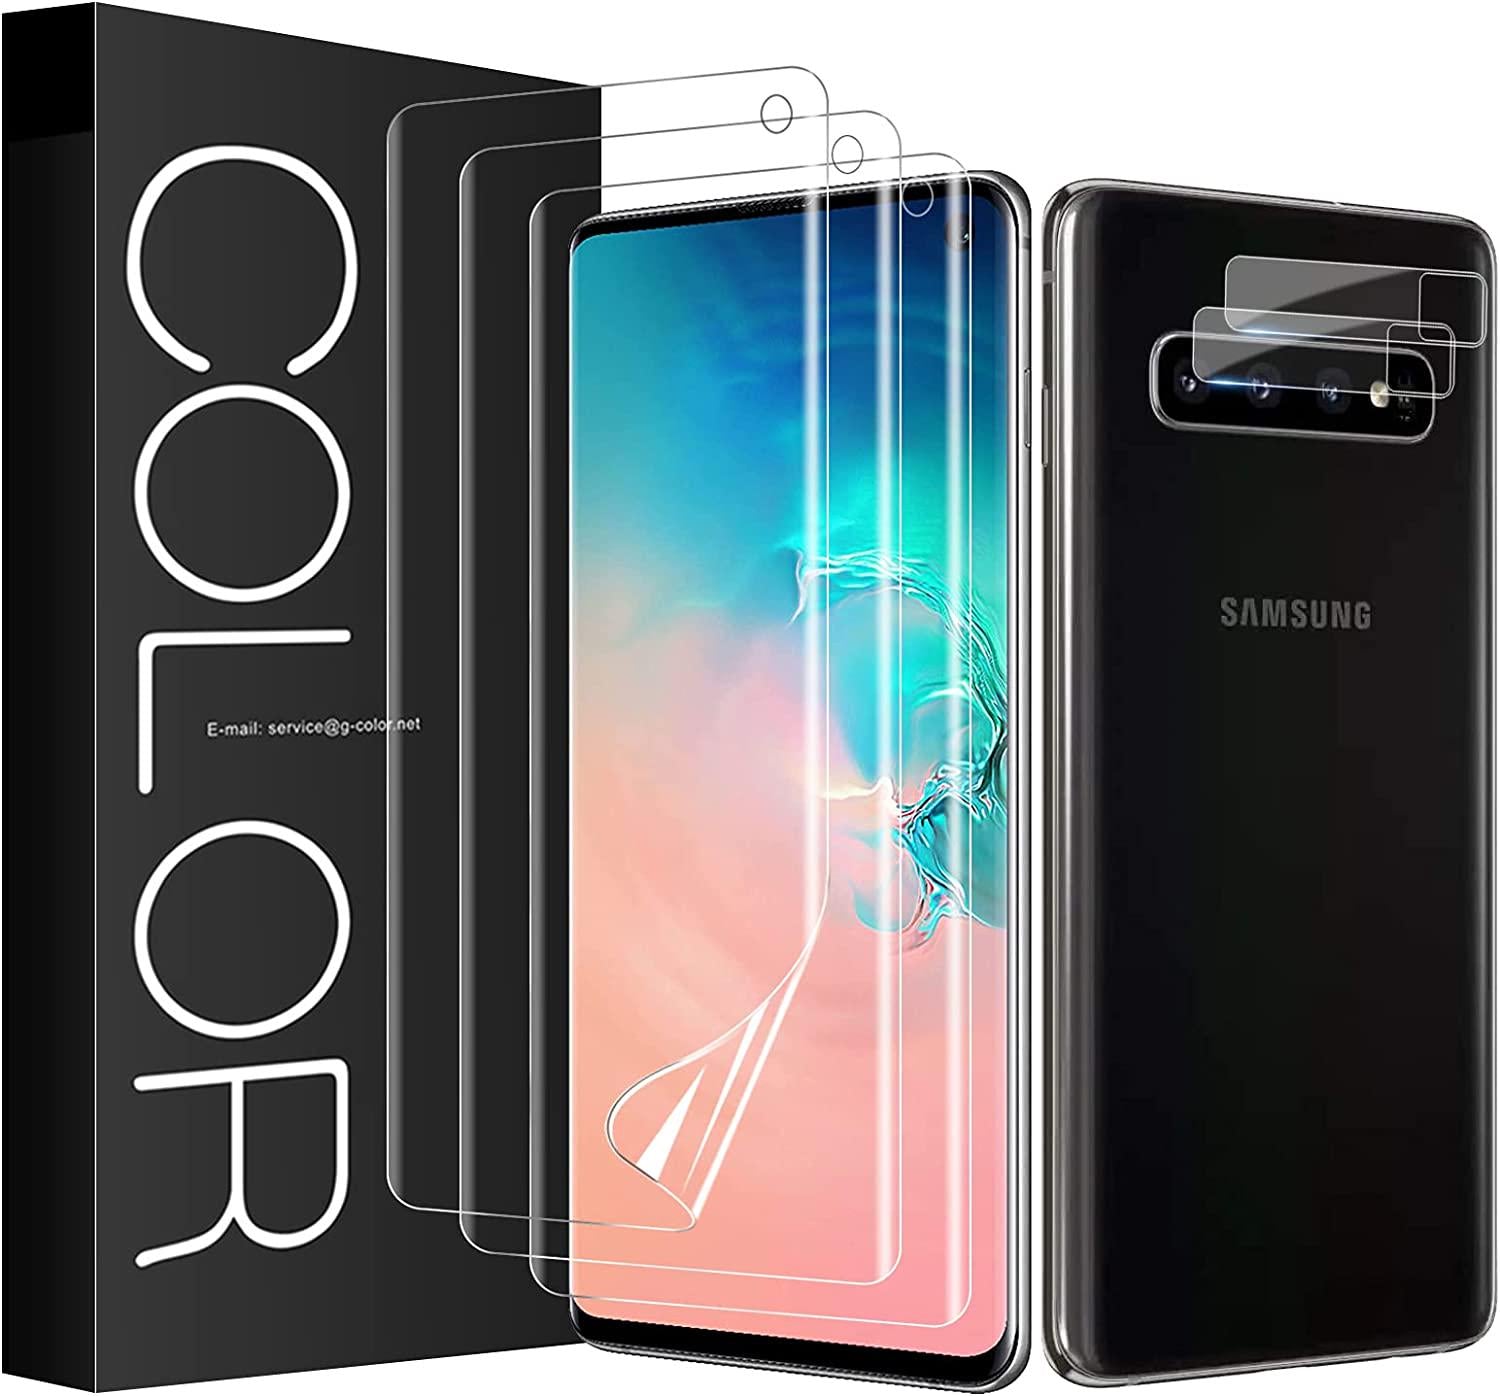 G-Color, G-Color Screen Protector for Samsung Galaxy S10, 3-Pack [Case Friendly] TPU Film [Not Tempered Glass] HD Clear Bubble Free Screen Protector for Samsung S10